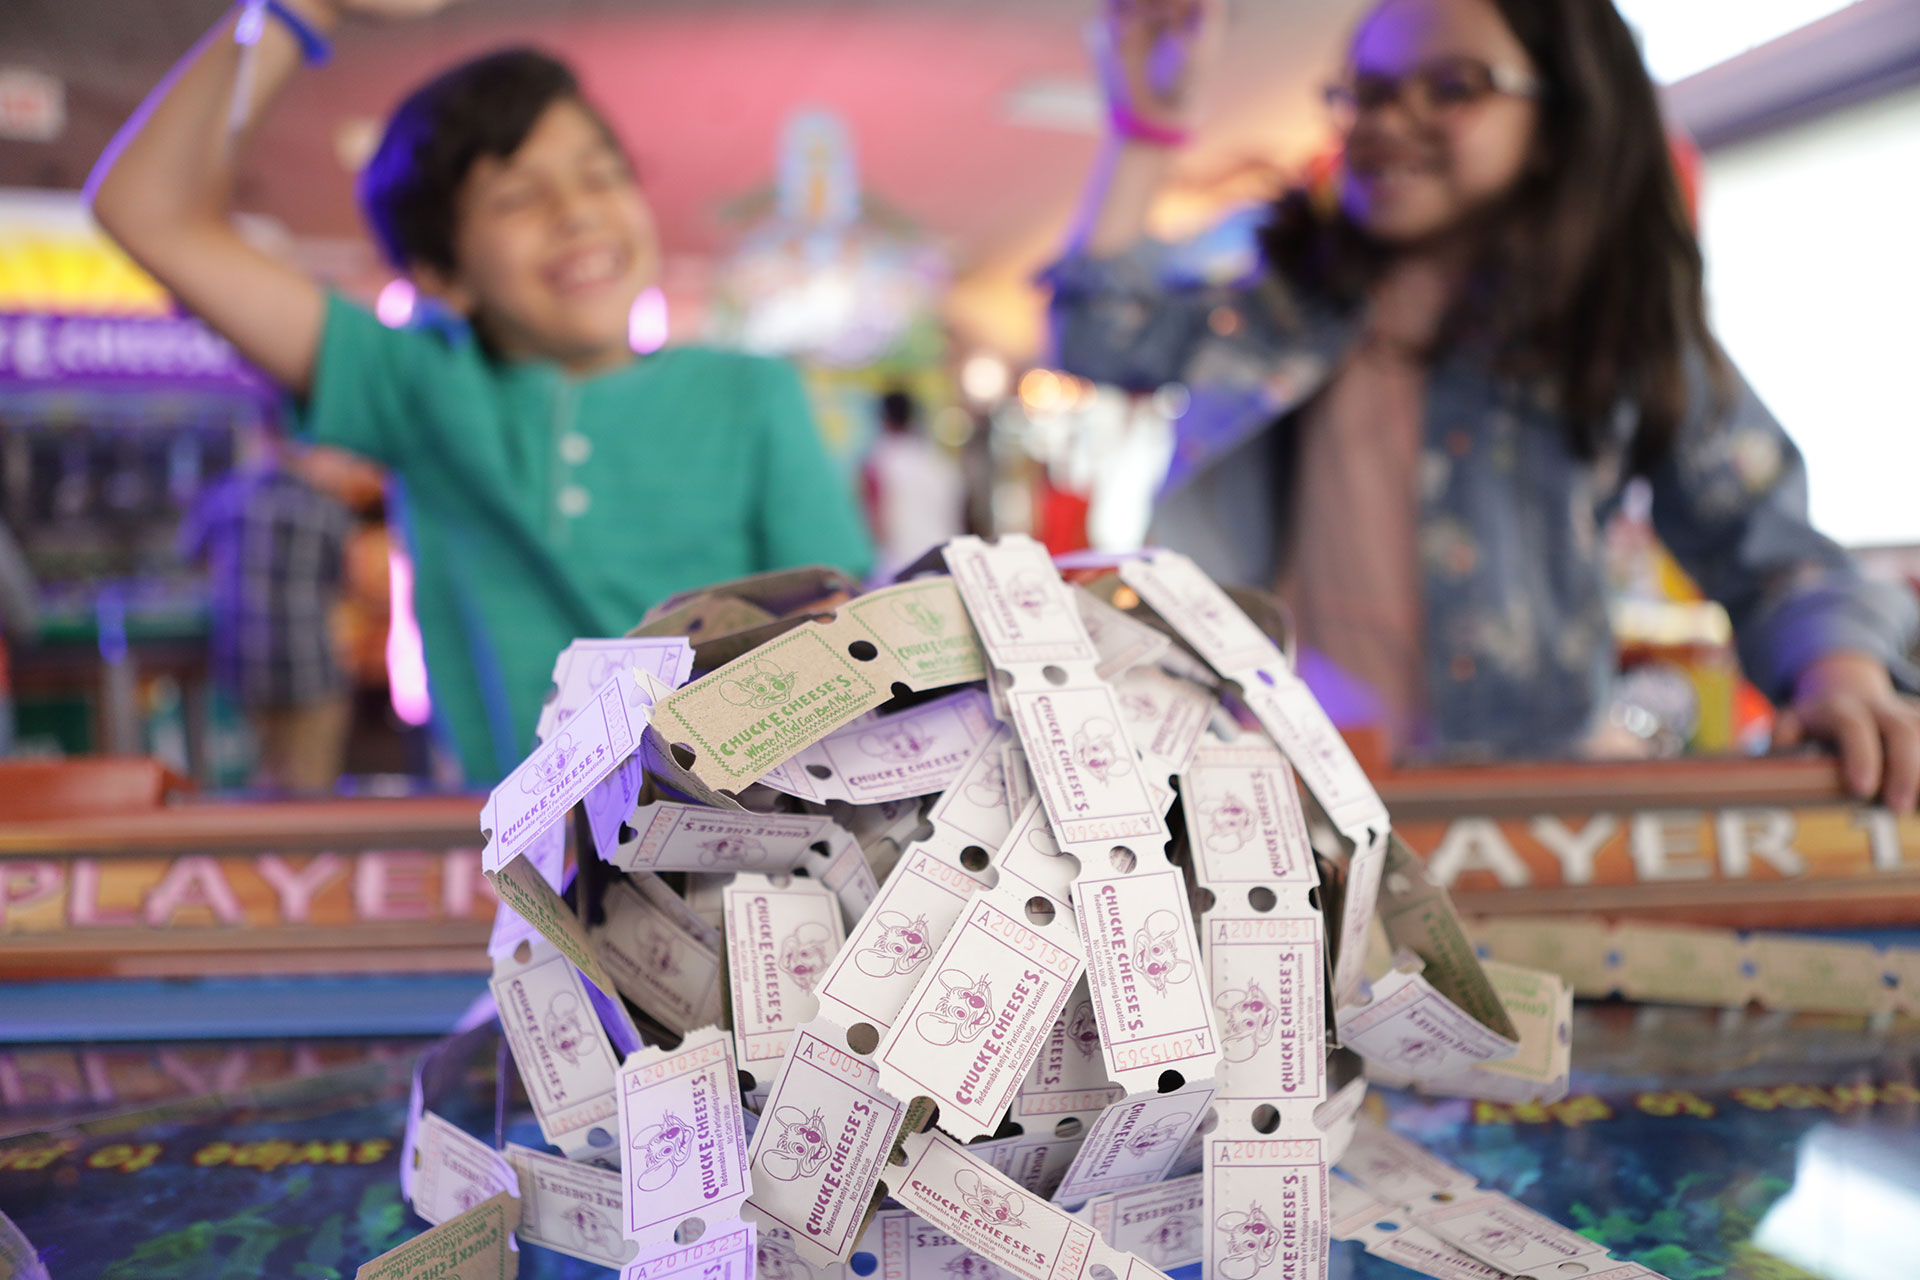 Two kids cheering behind pile of tickets